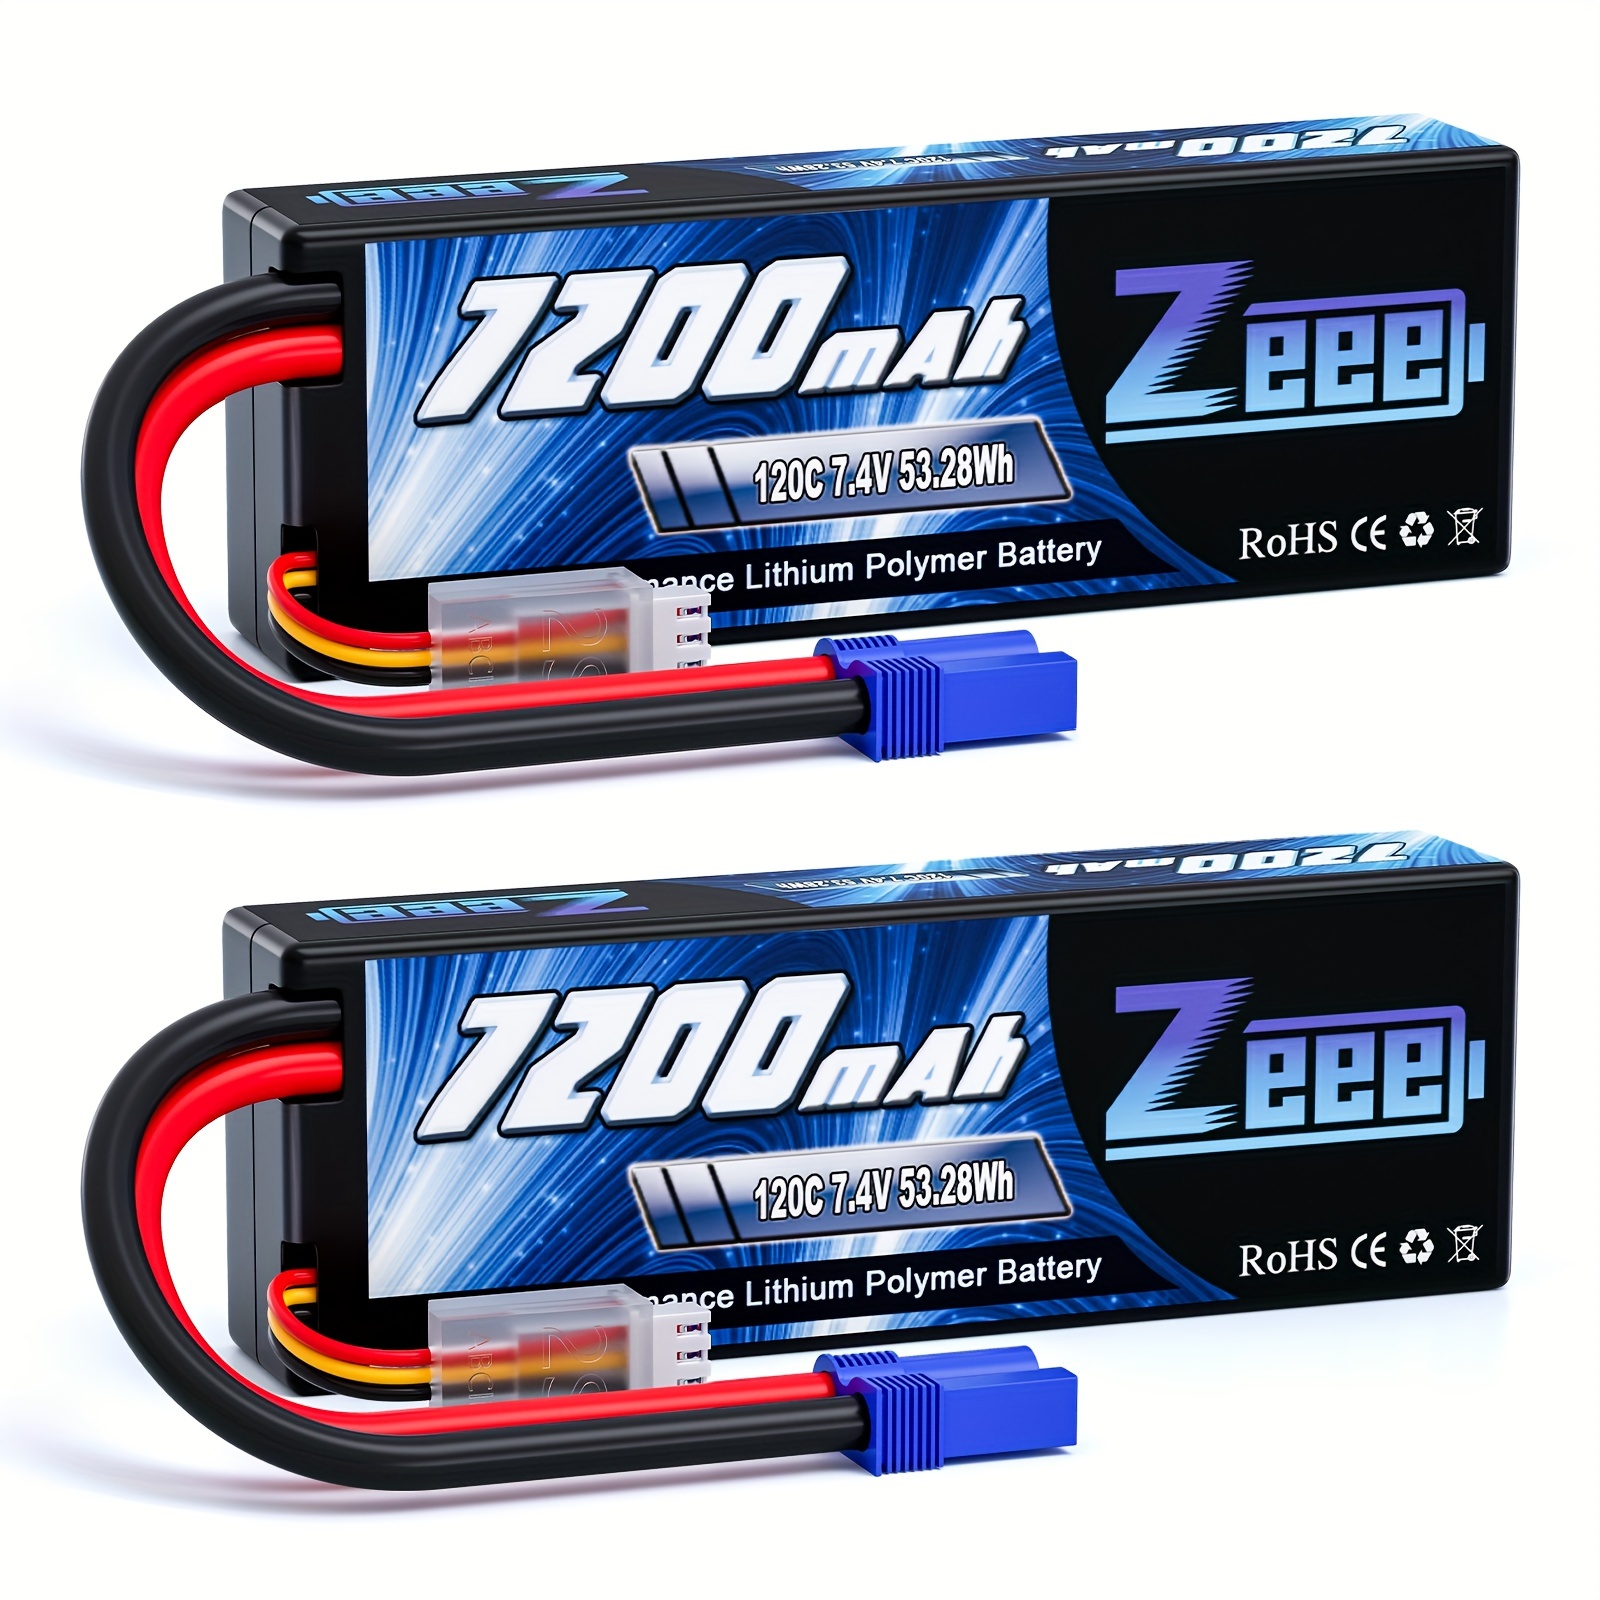 

Zeee 2s Lipo Battery 7200mah 7.4v 120c Hard Case Rc Battery With Ec5 Connector For Rc Car Truck Rc Vehicles Truggy Buggy Tank Helicopter Airplane Racing Models (2 Pack)